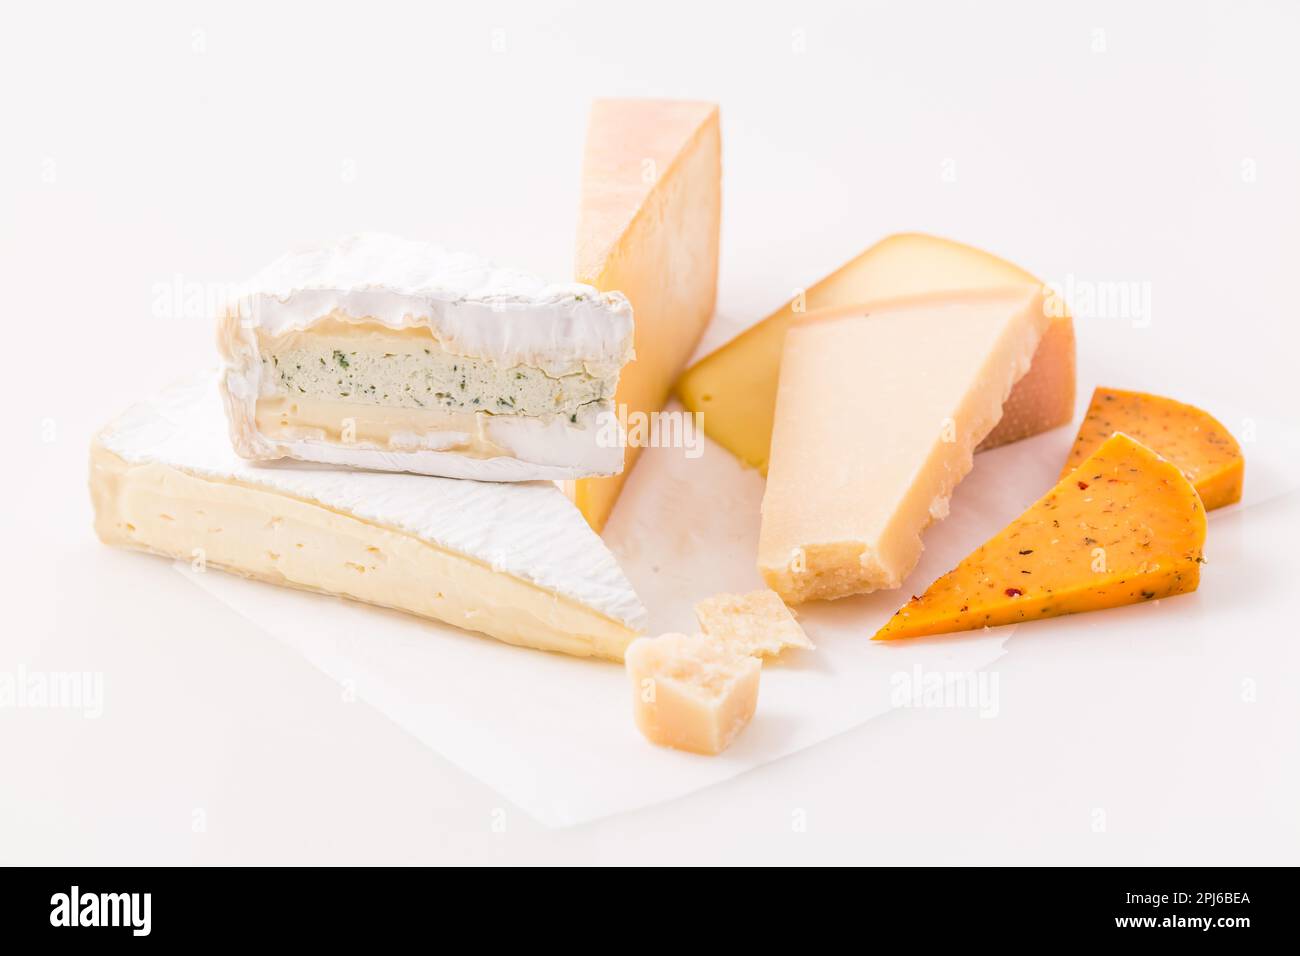 Assortment of different cheeses on white background. Hard cheese, parmesan, brie and chili cheese Stock Photo